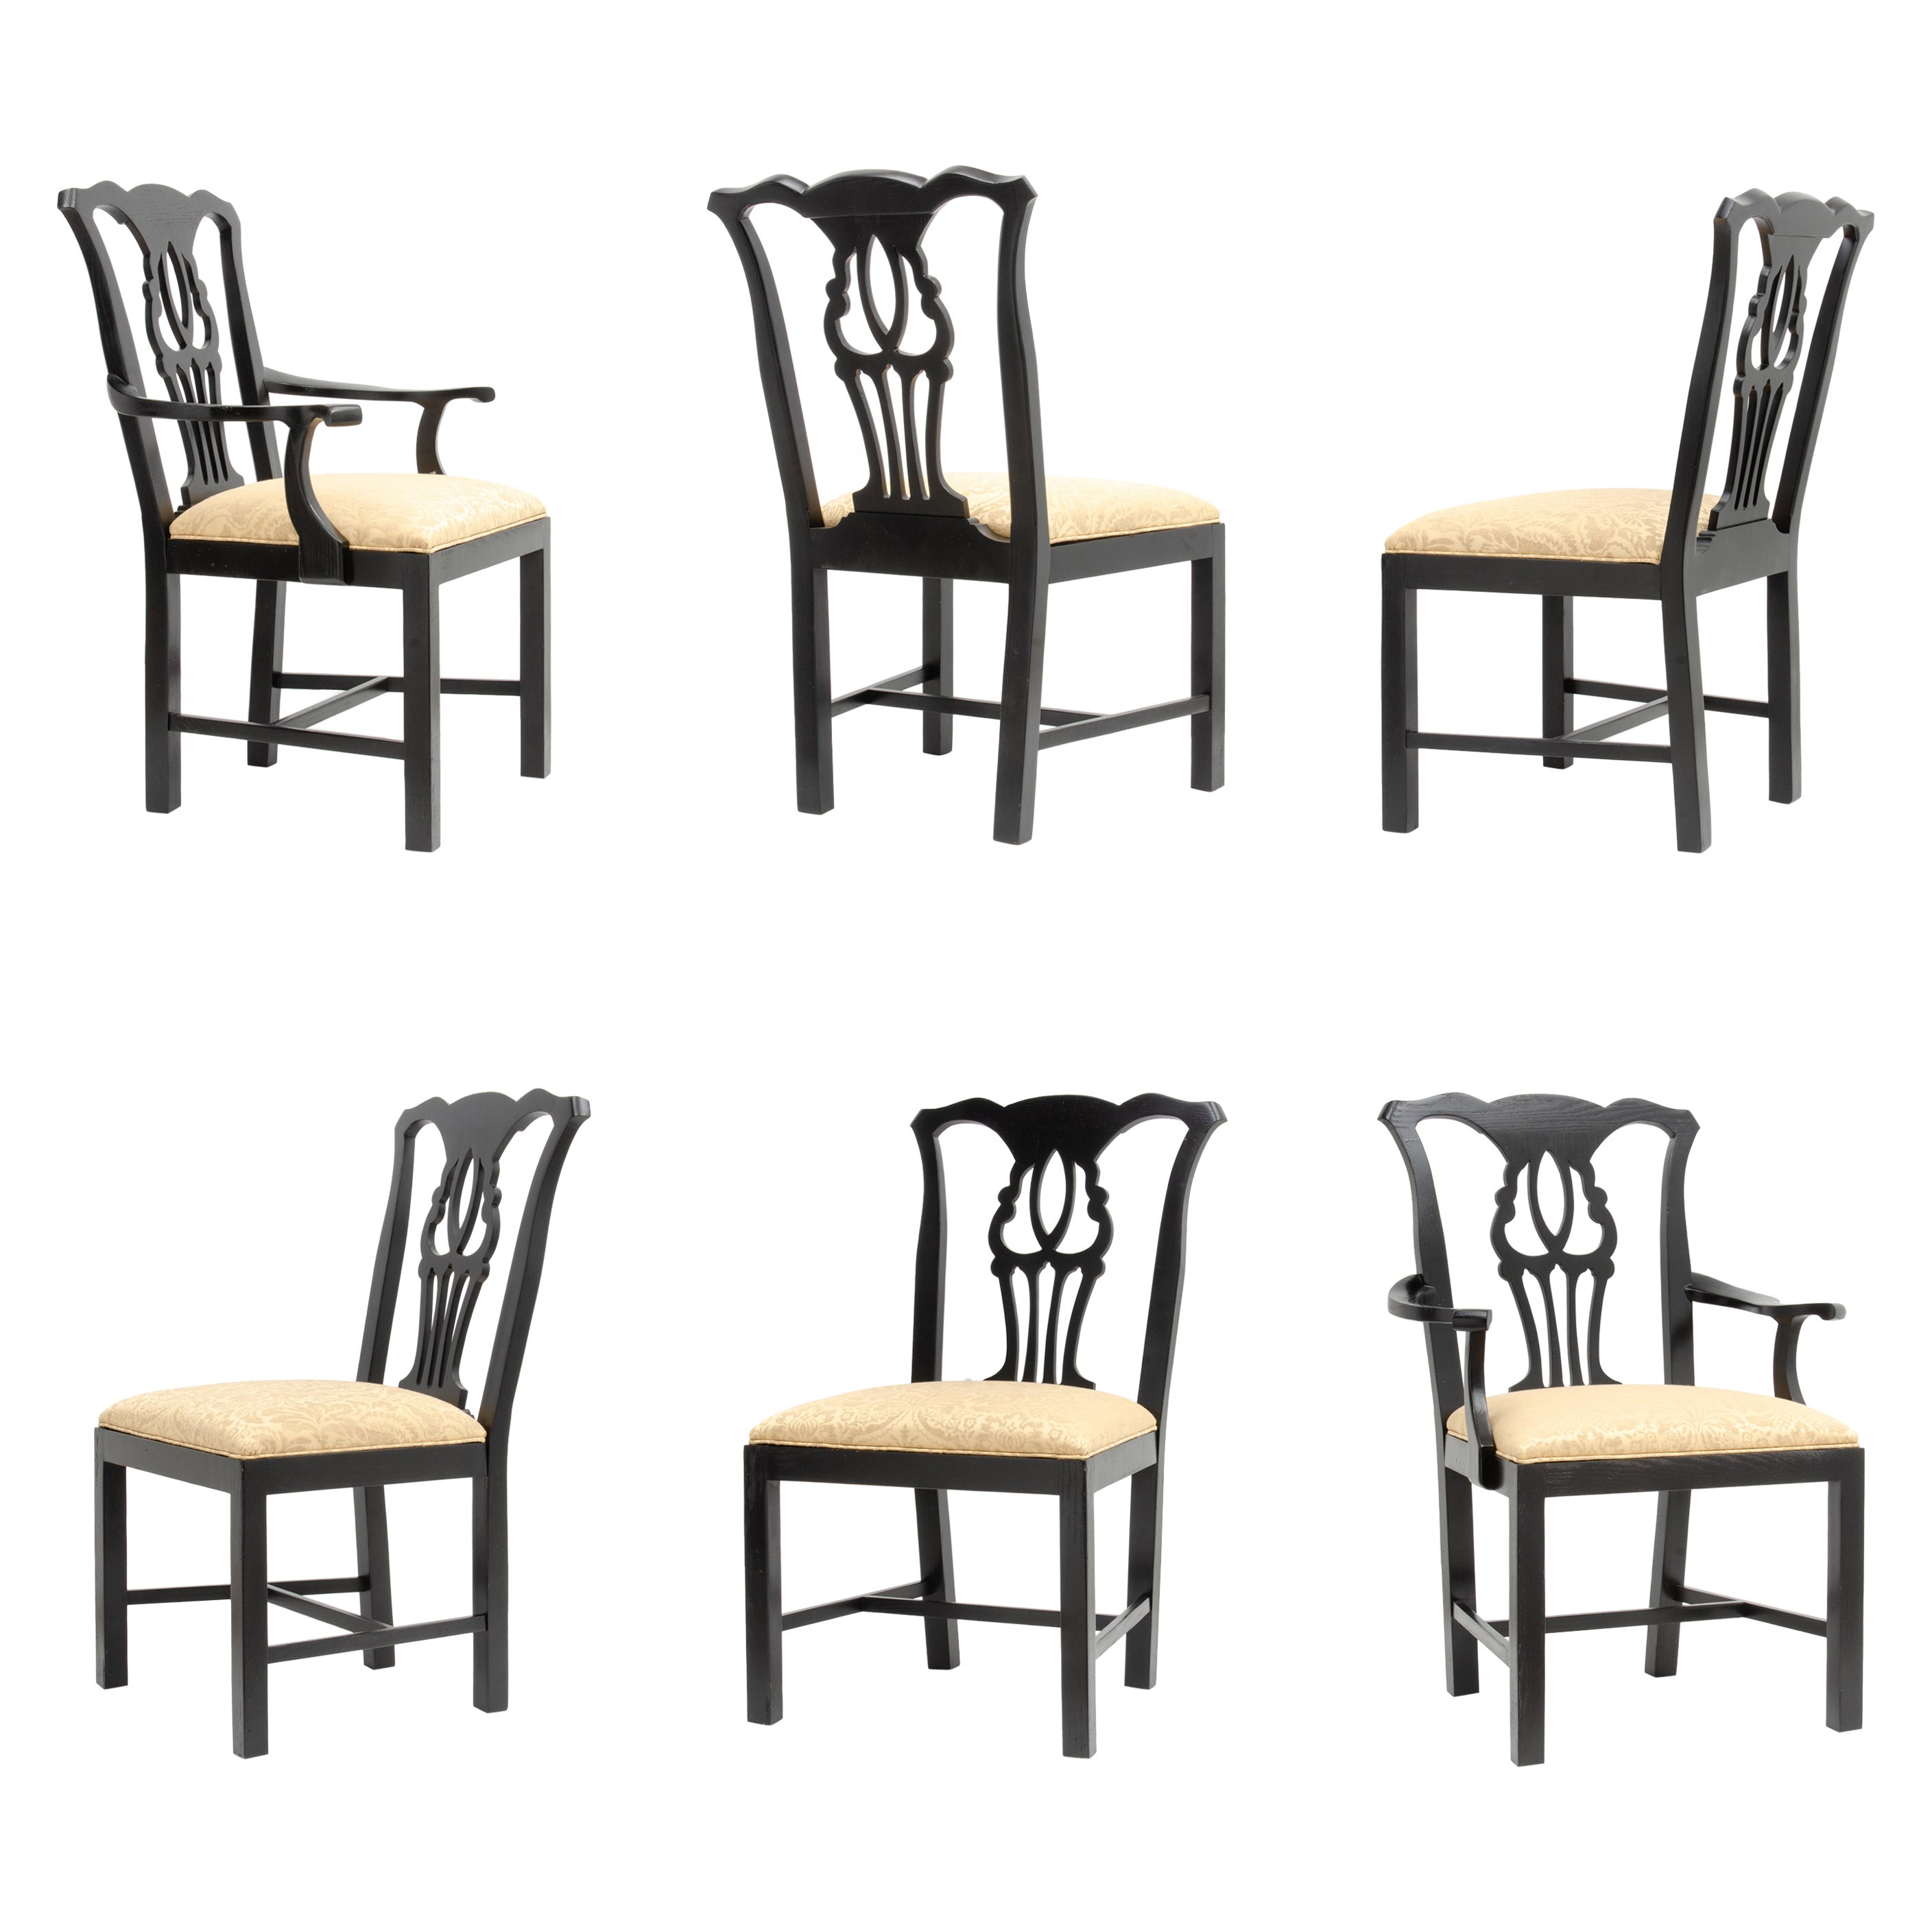 Black Lacquer John Stuart Chippendale Dining Chairs Mid Century - a Set of 6 For Sale